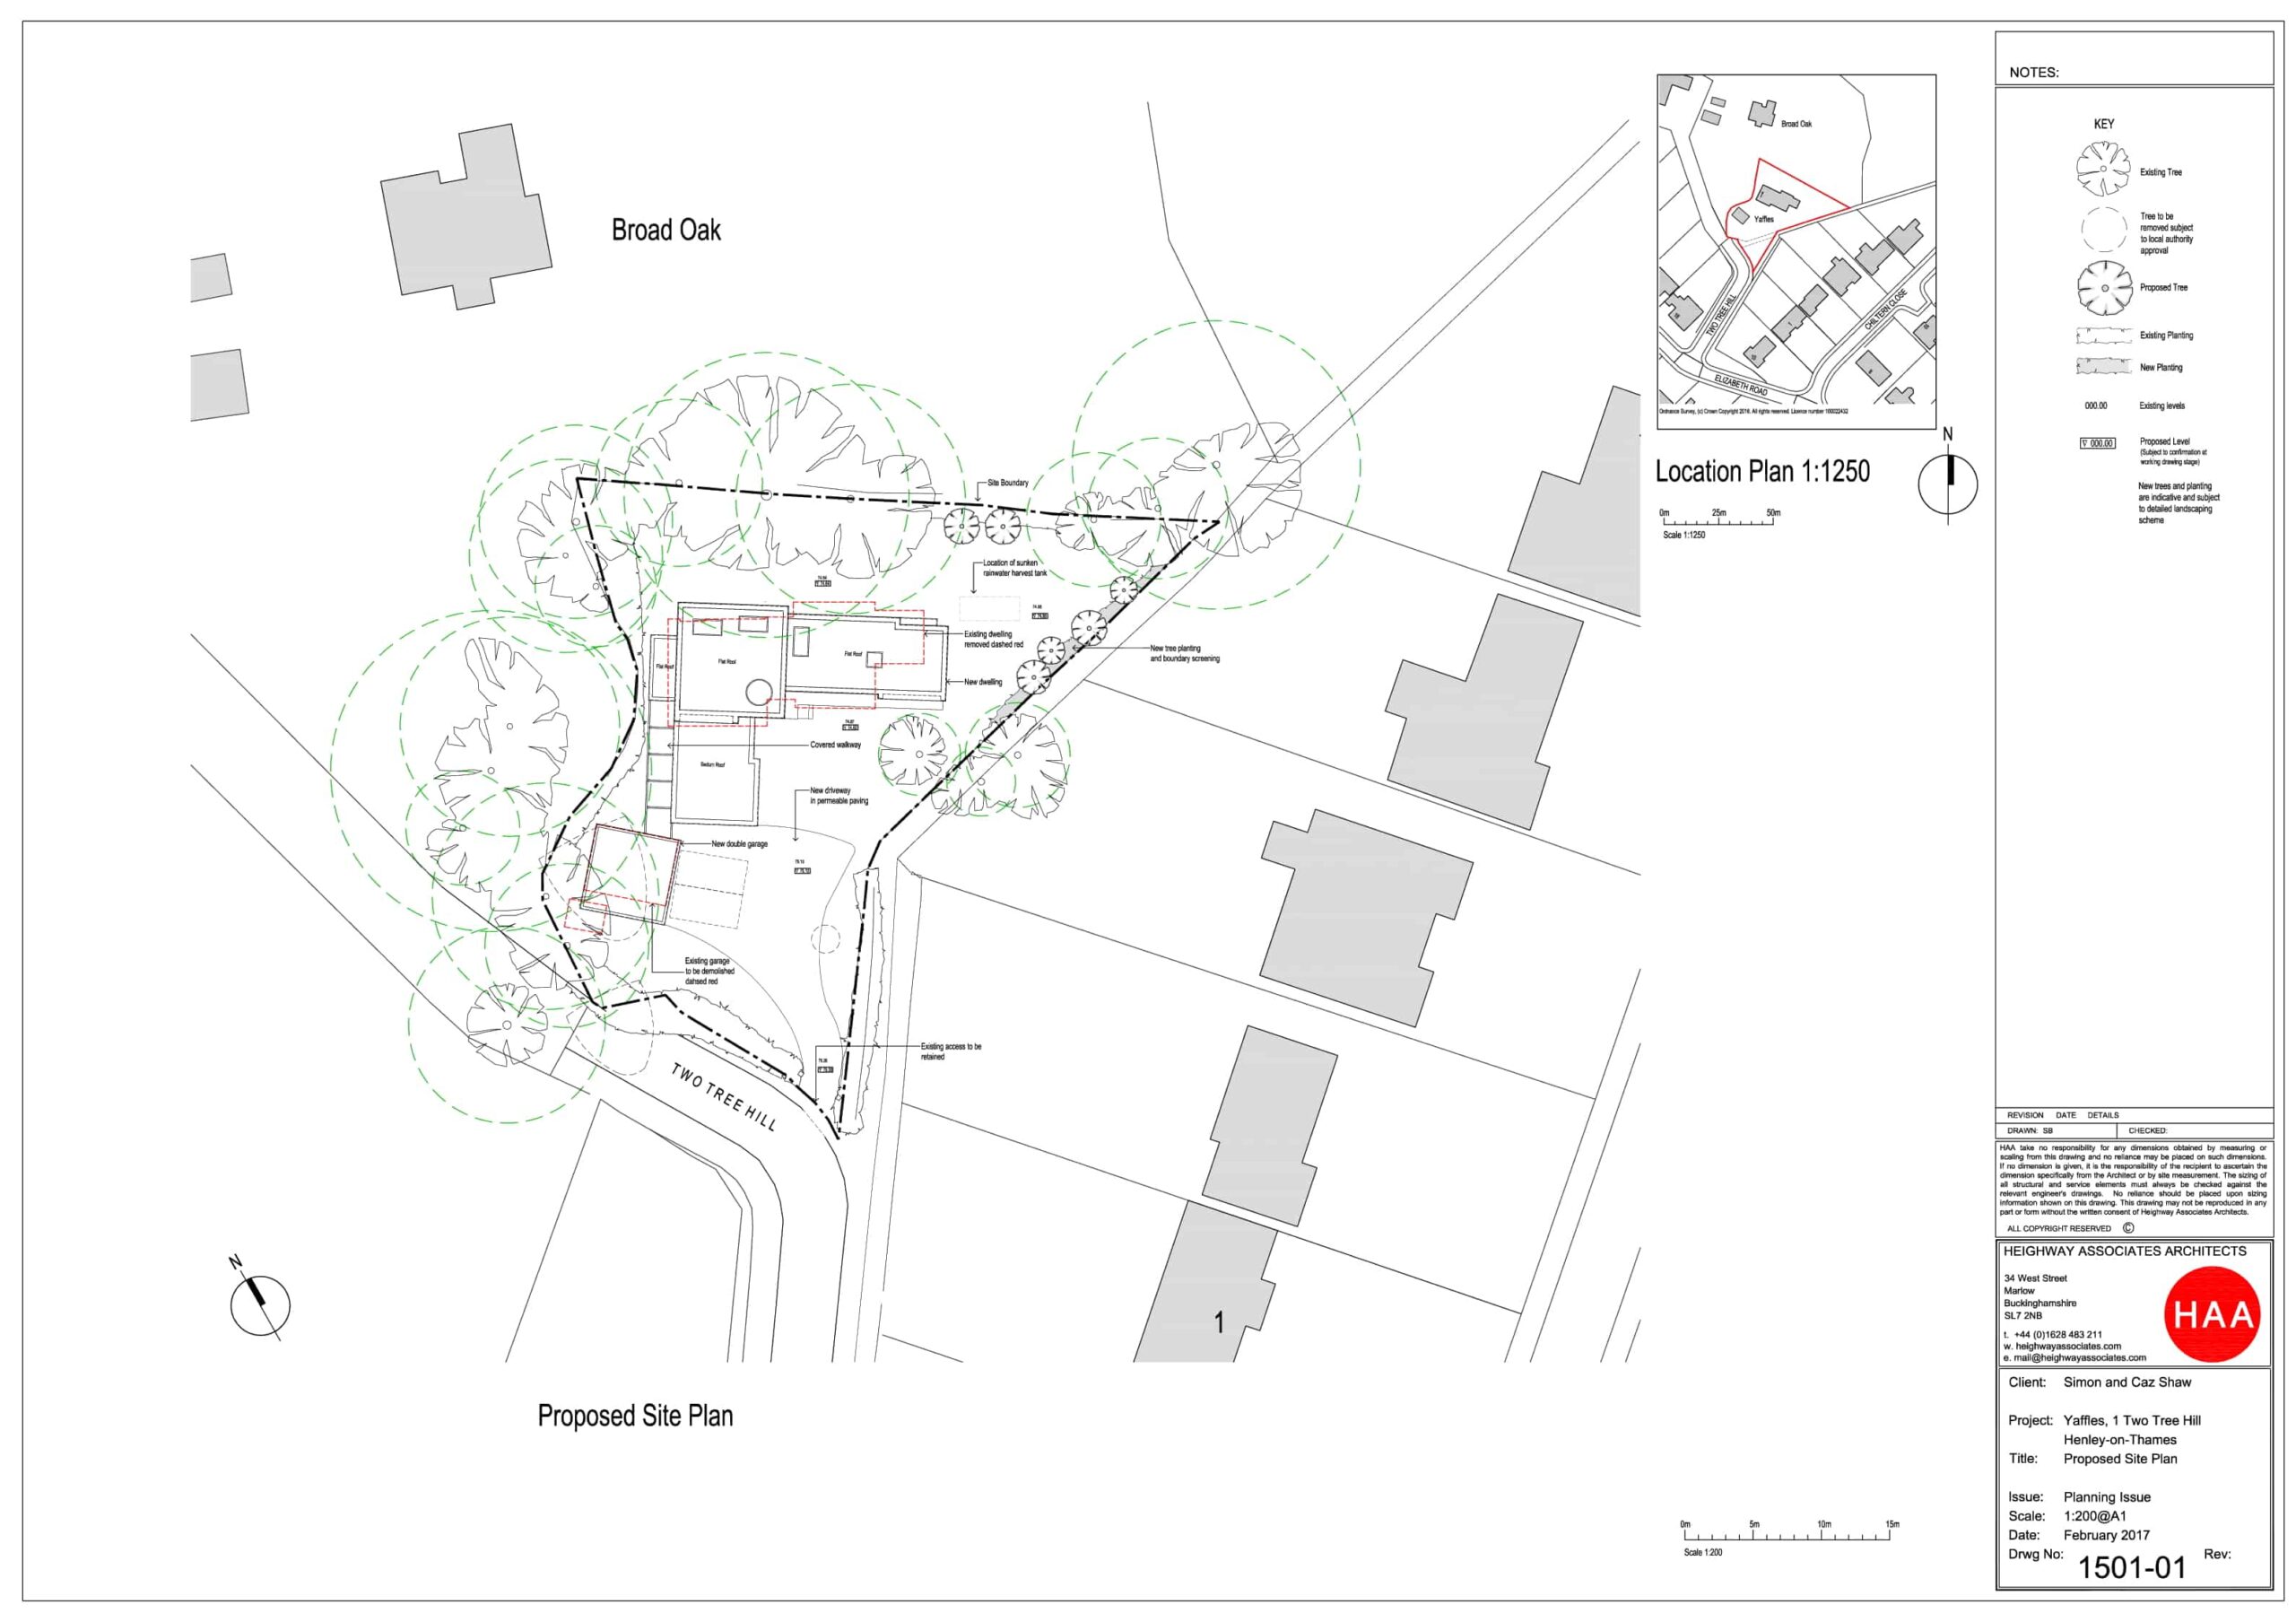 1501-01 Yaffles Proposed Site Plan A1_1